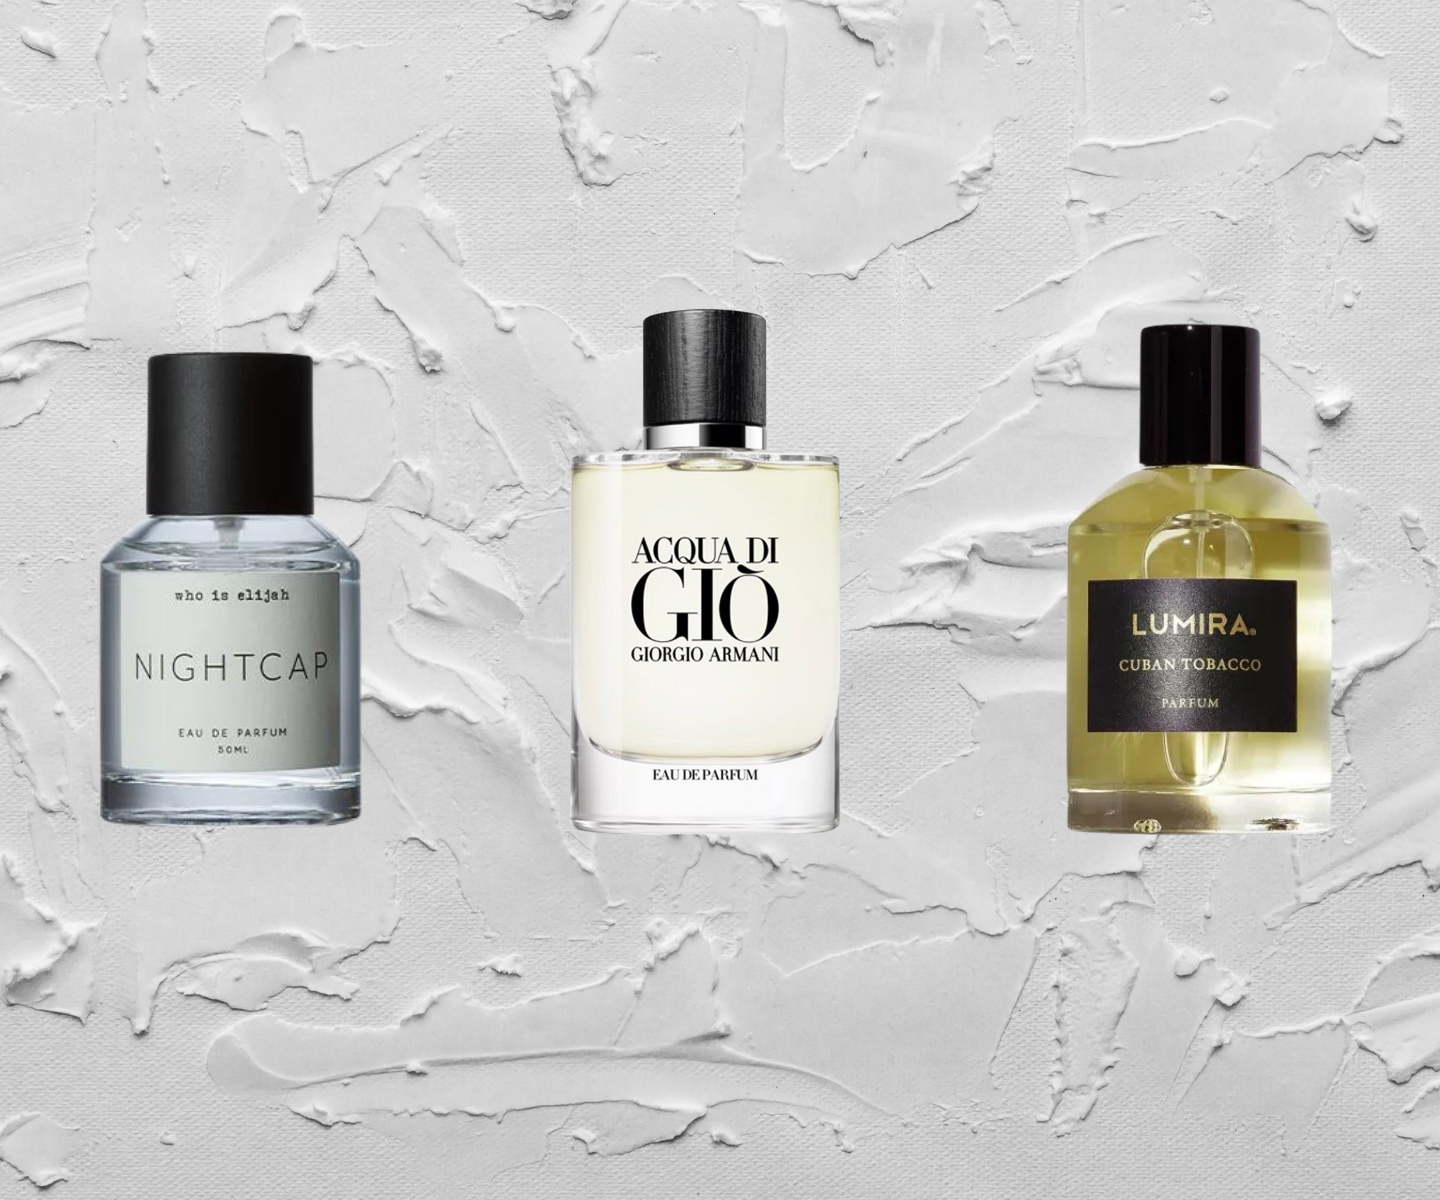 These Are Our Top 5 'Hot Man' Fragrances of All Time